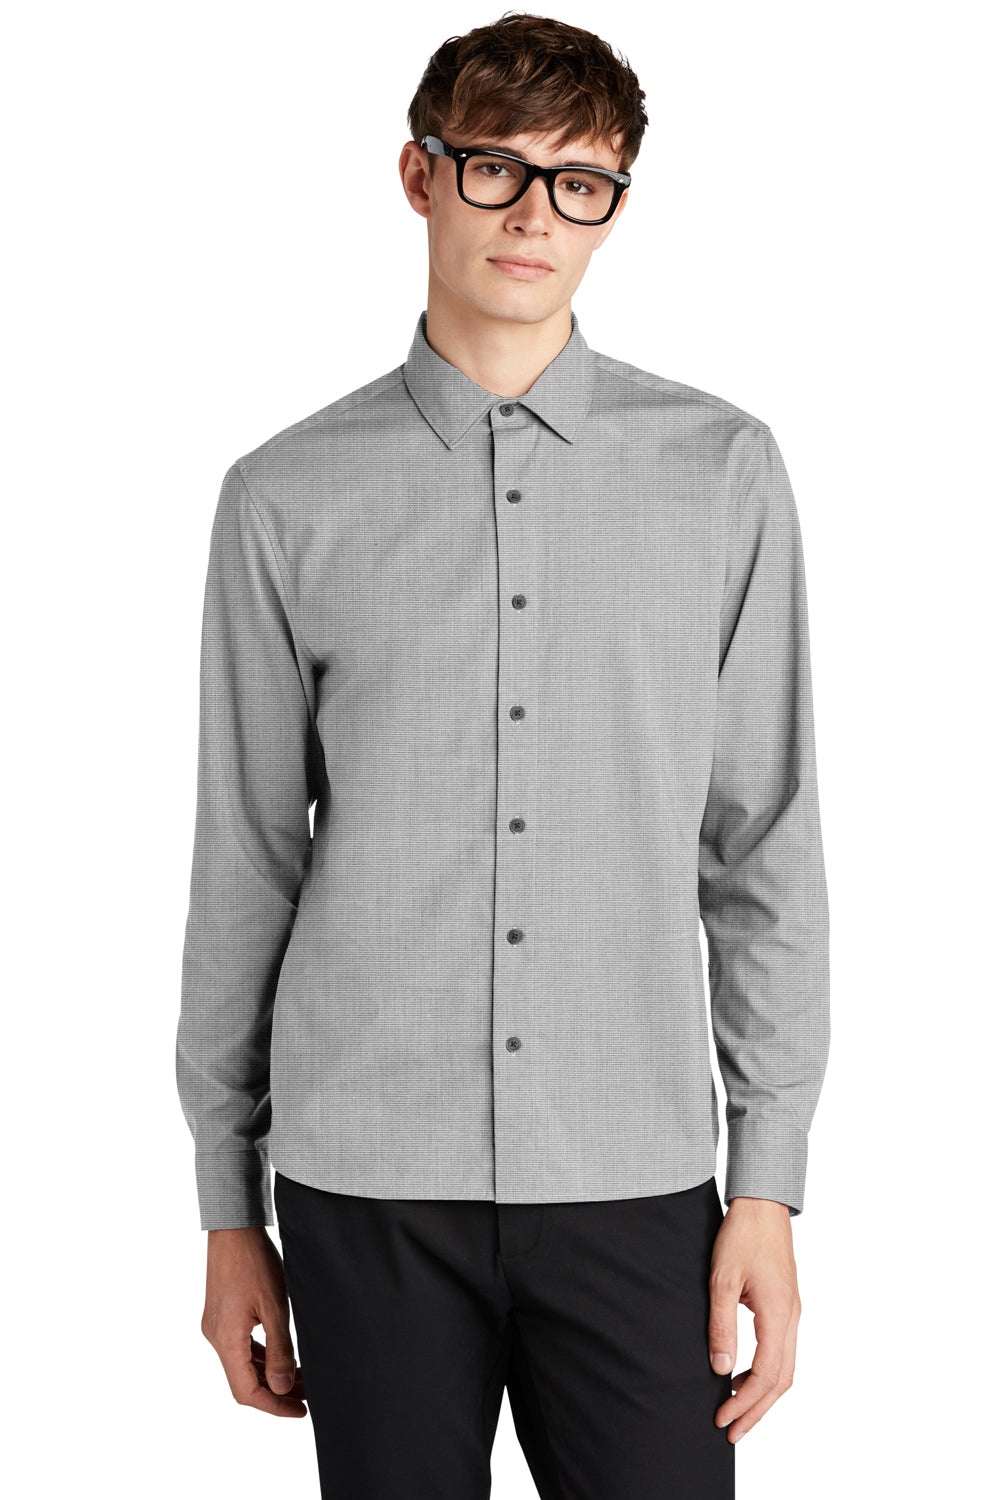 Mercer+Mettle MM2000 Stretch Woven Long Sleeve Button Down Shirt Gusty Grey Front